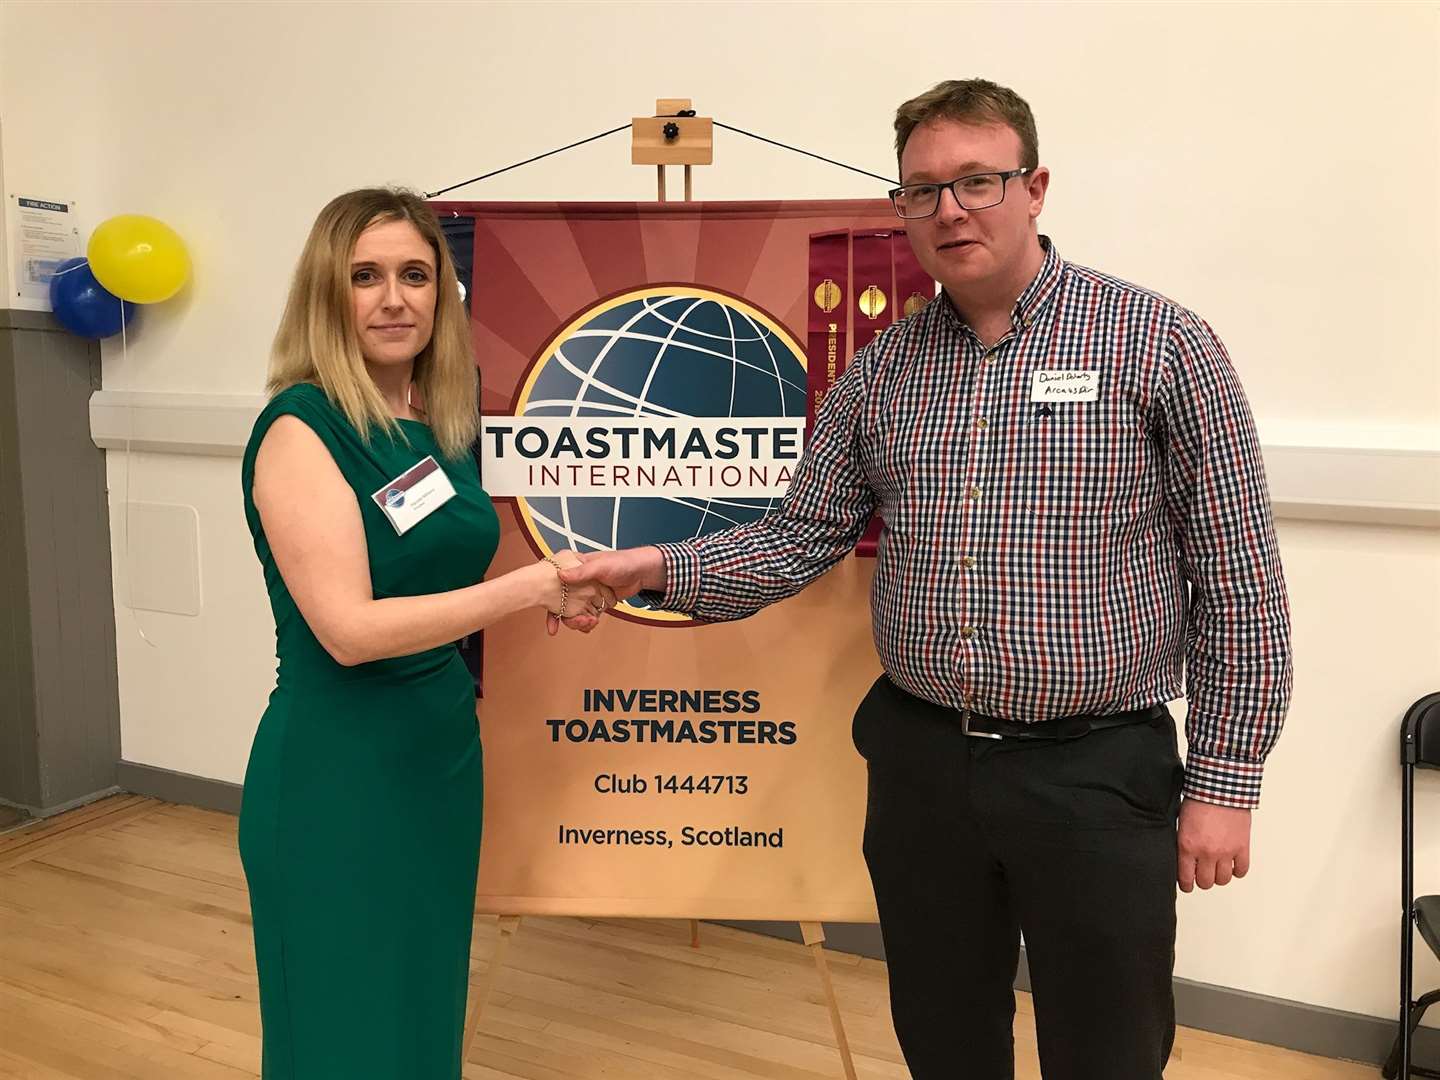 Inverness Toastmasters Club president Pamela Williams with area director Daniel Doherty at the anniversary event.